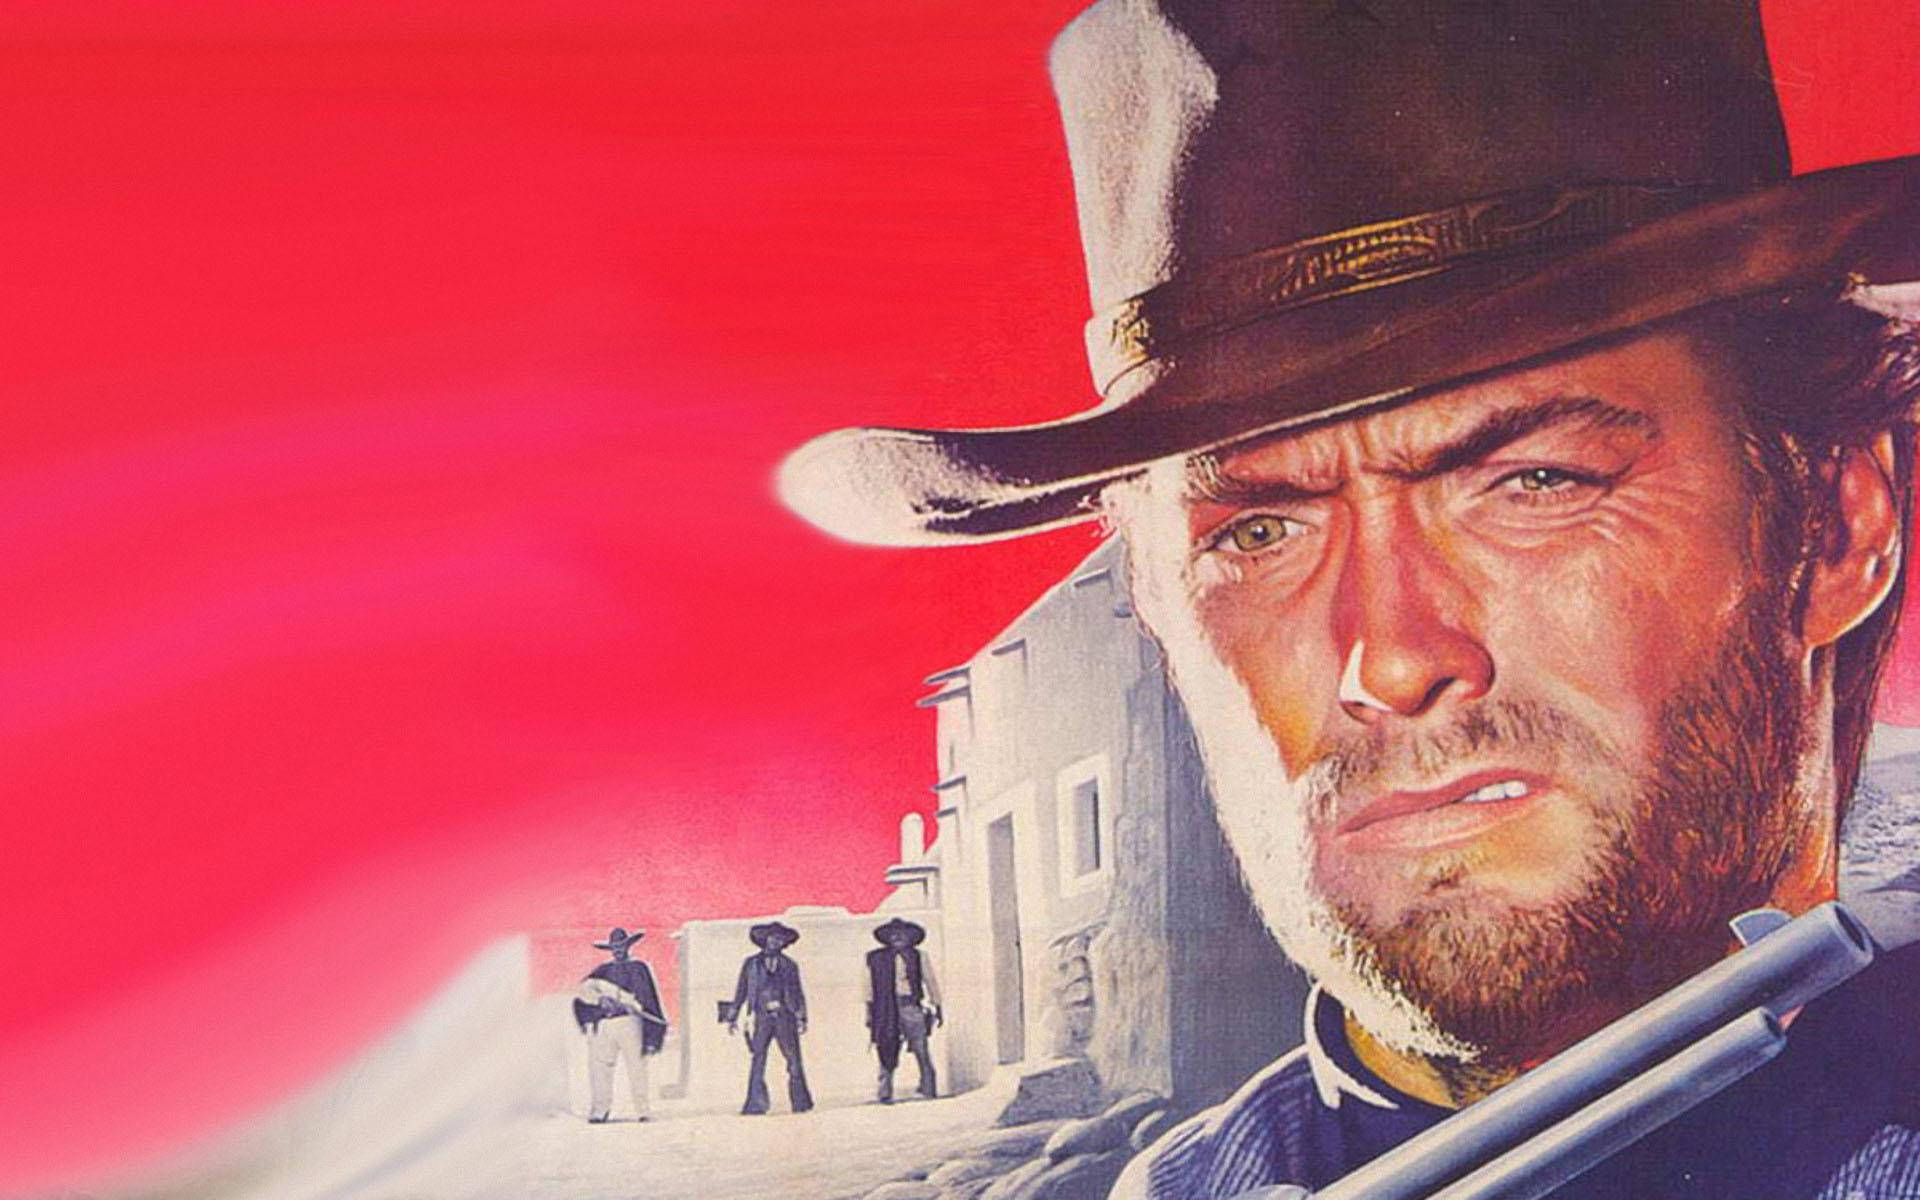 Clint Eastwood The Good, The Bad And The Ugly Painting Wallpaper